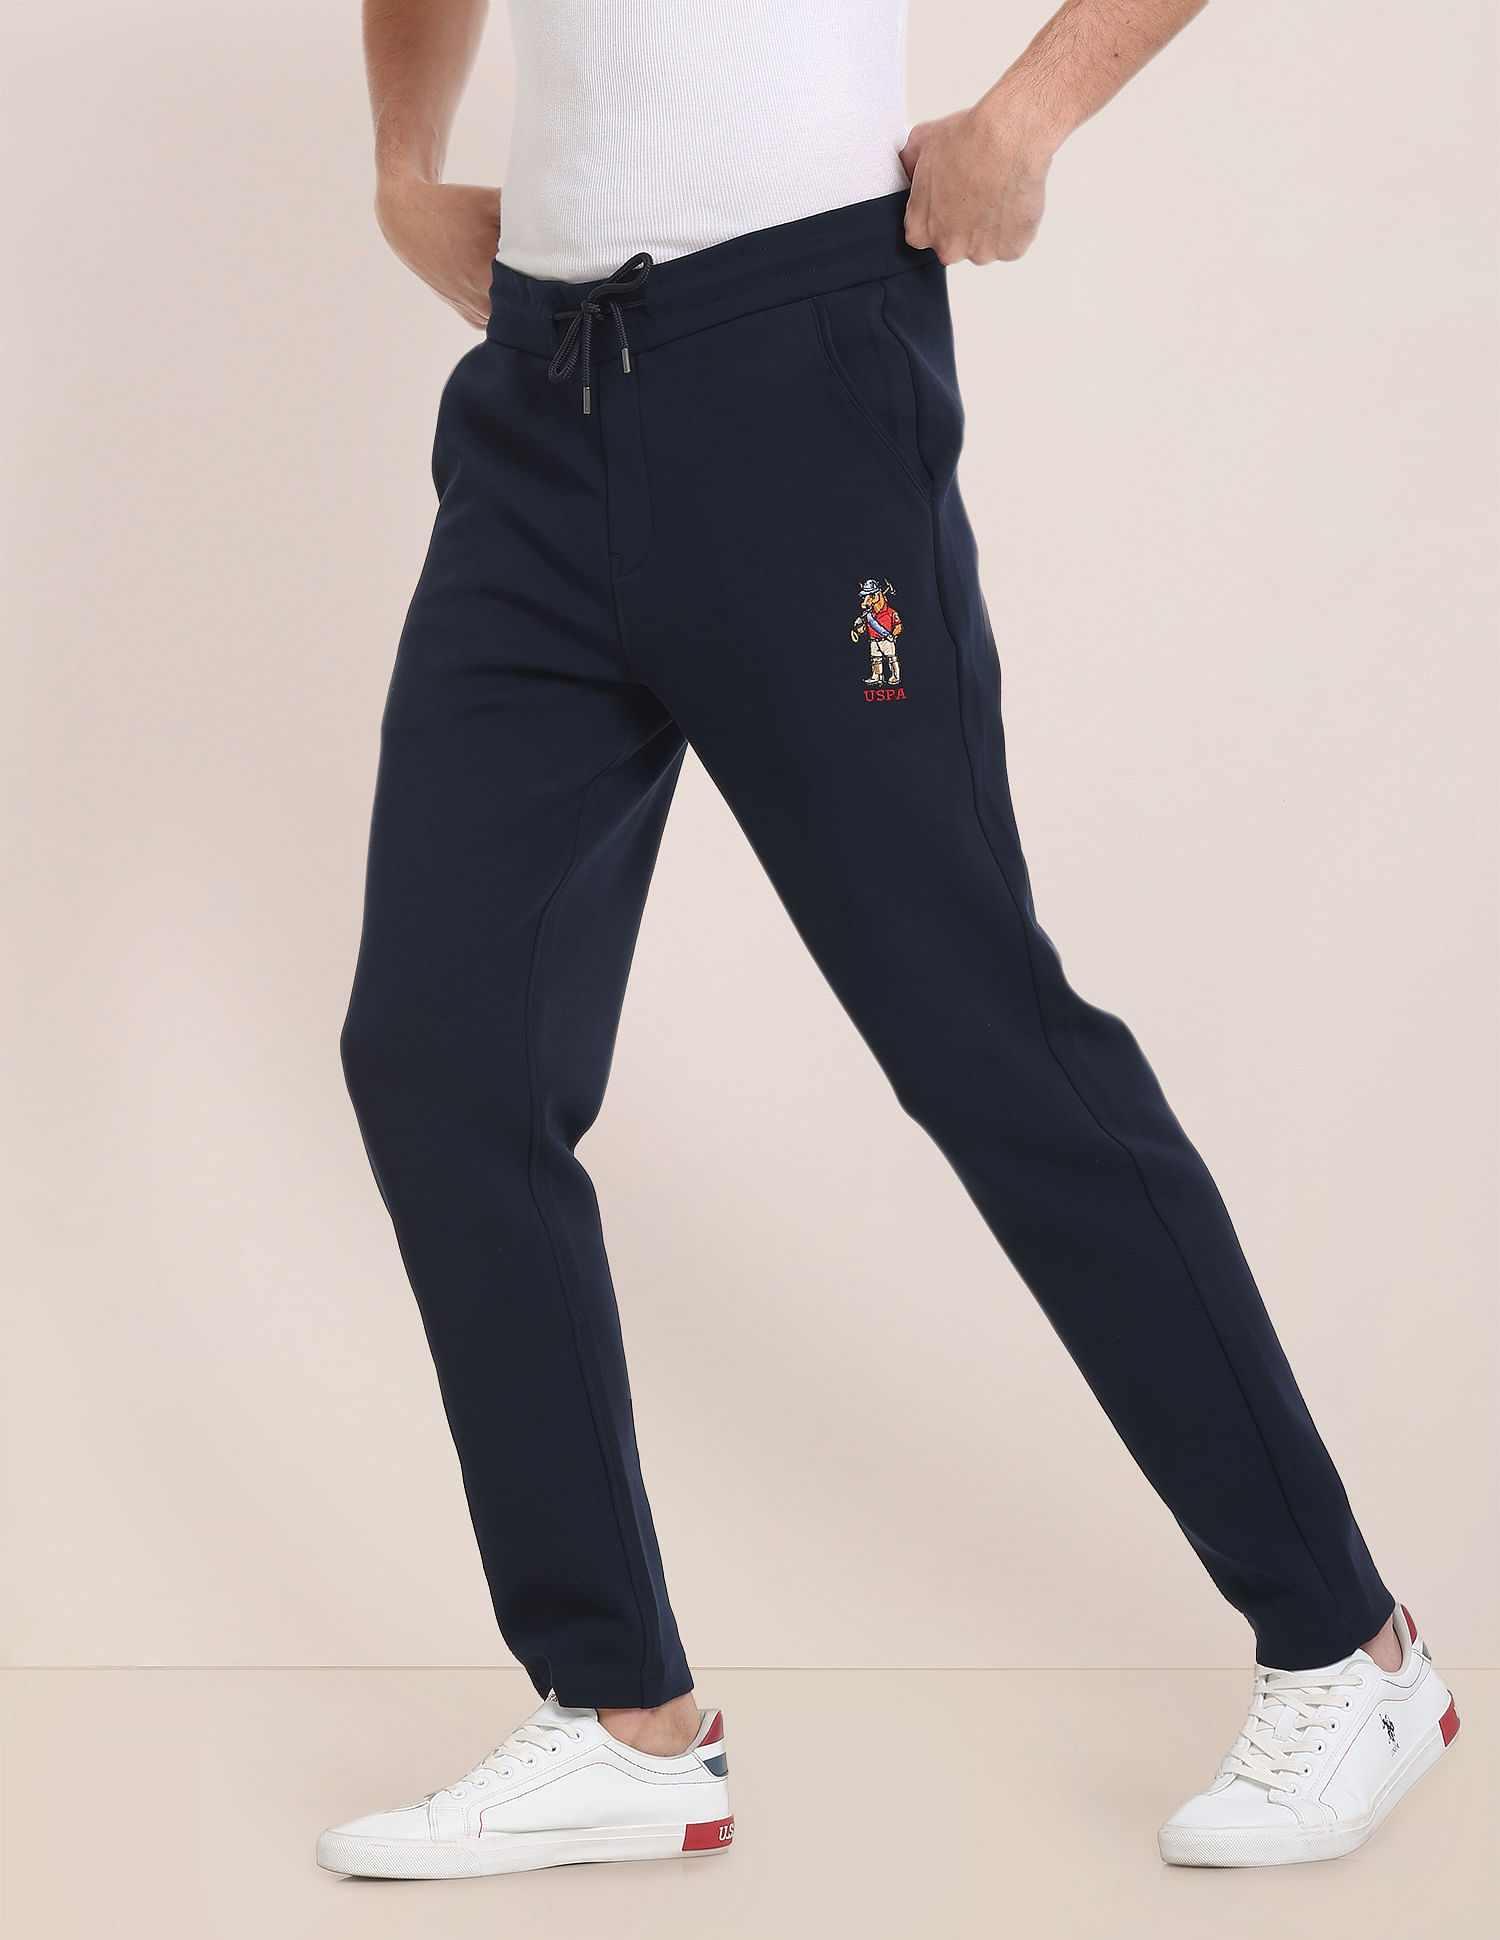 Buy U.S. Polo Assn. Slim Fit Solid Coordinate Track Pants - NNNOW.com